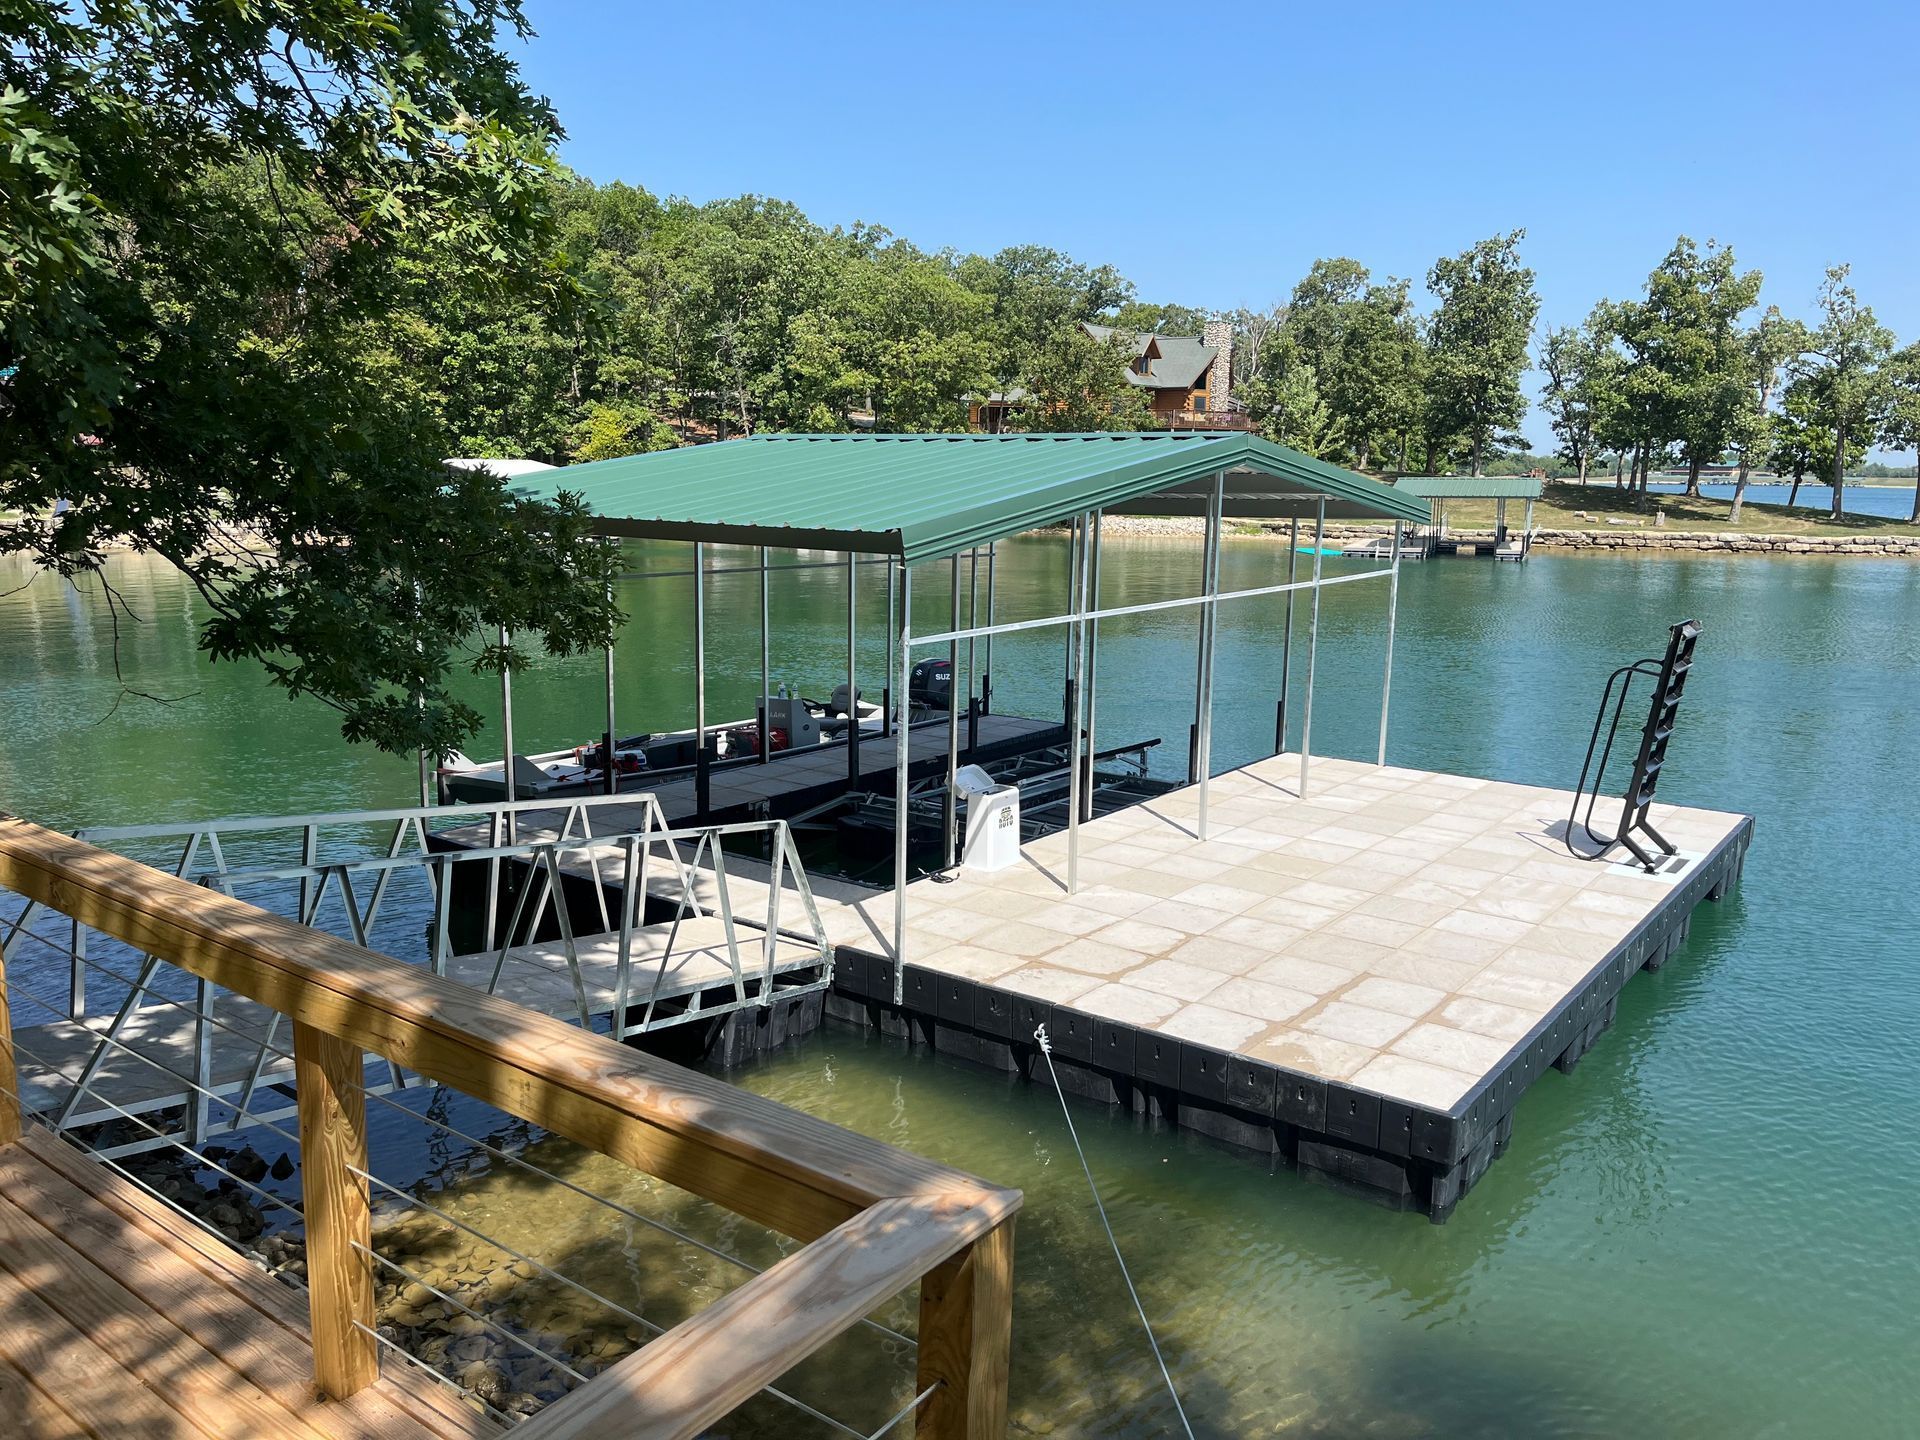 Experience Unmatched Quality With Mac's Docks on Lake Winnebago.